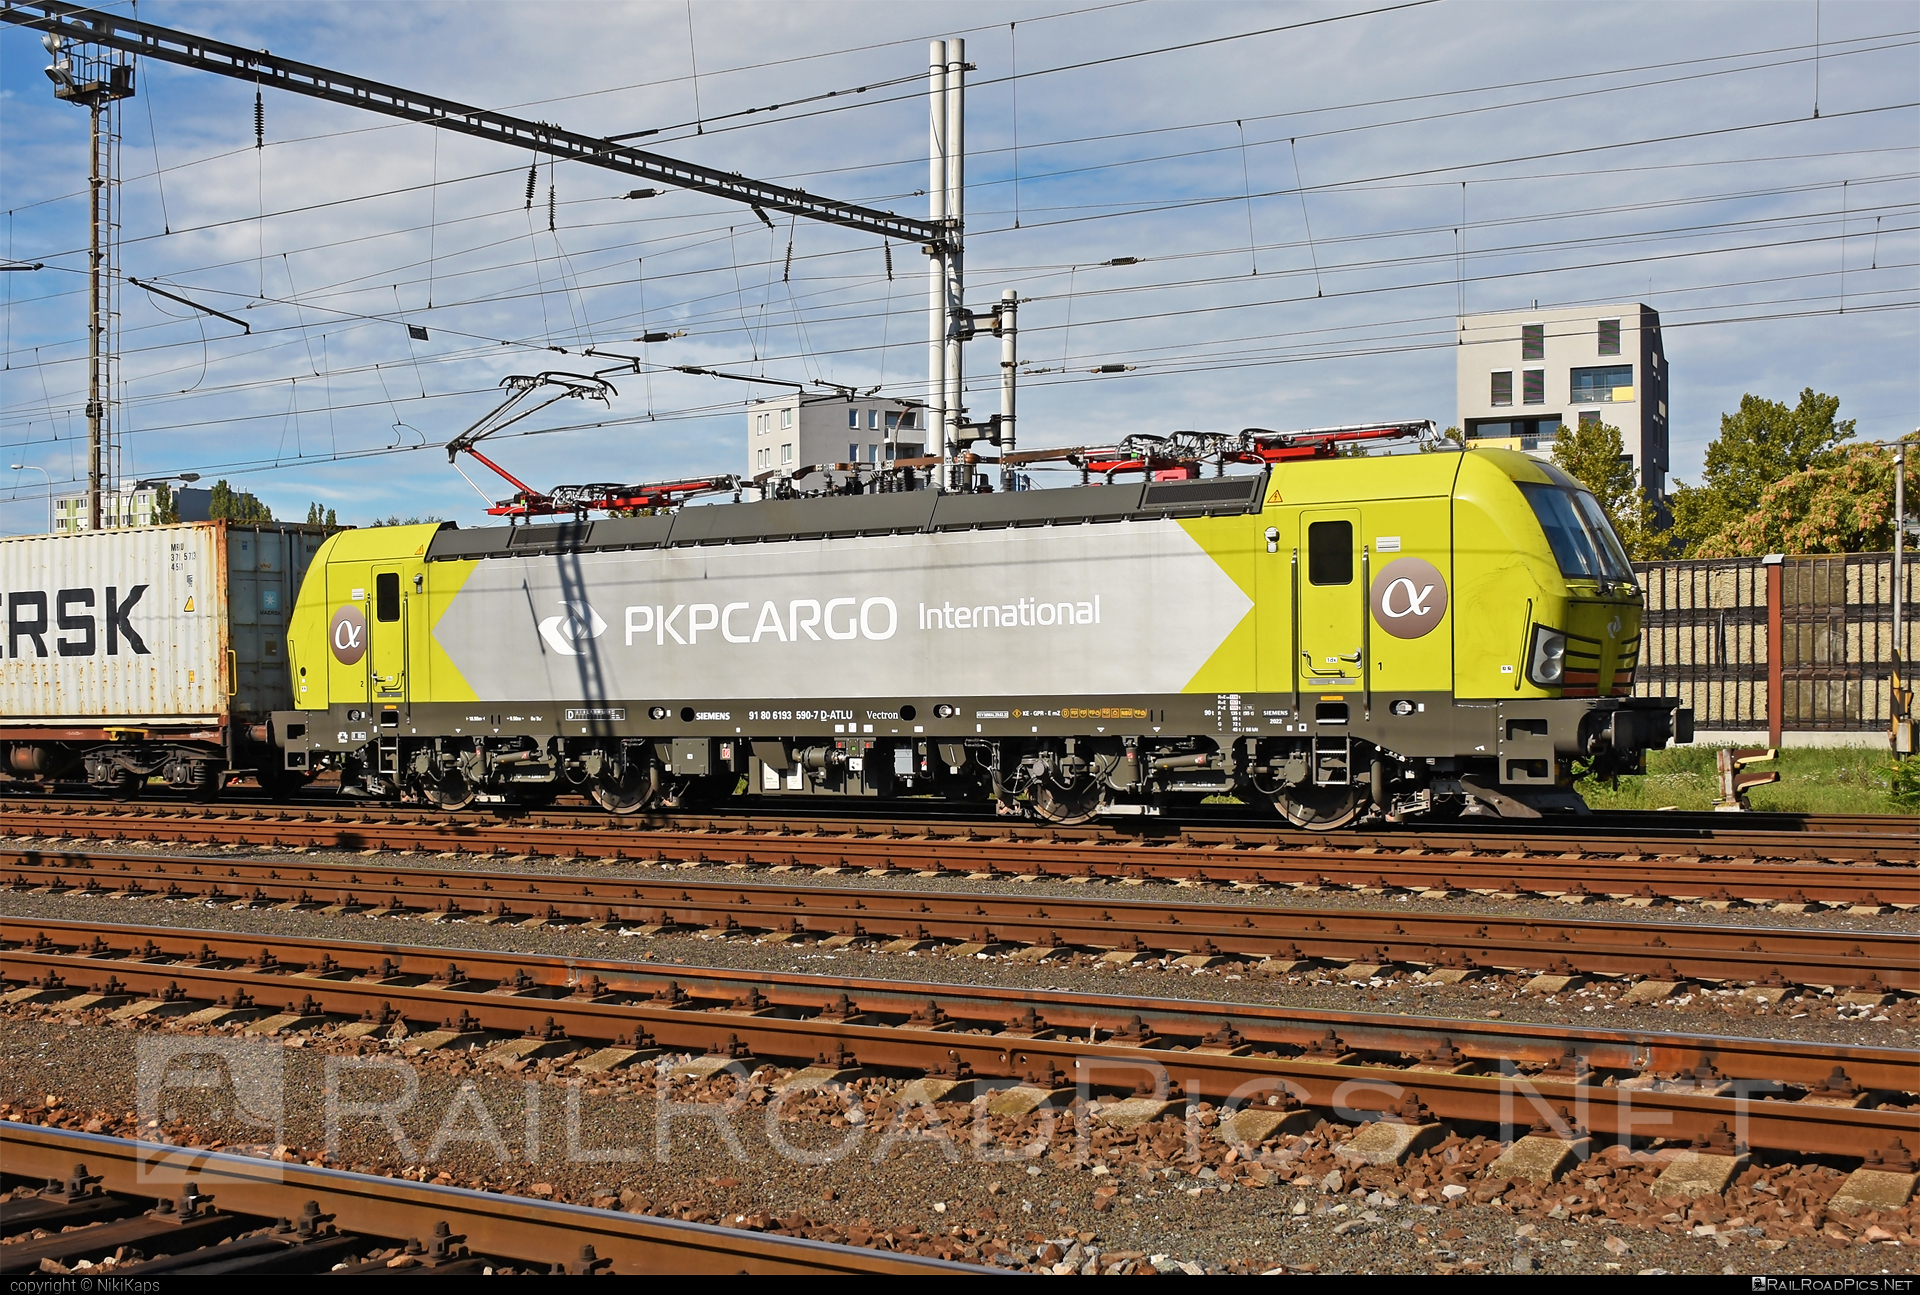 Siemens Vectron MS - 193 590 operated by PKP CARGO INTERNATIONAL a.s. #alphatrainsluxembourg #container #flatwagon #maersk #pkpcargointernational #pkpcargointernationalas #pkpci #siemens #siemensVectron #siemensVectronMS #vectron #vectronMS